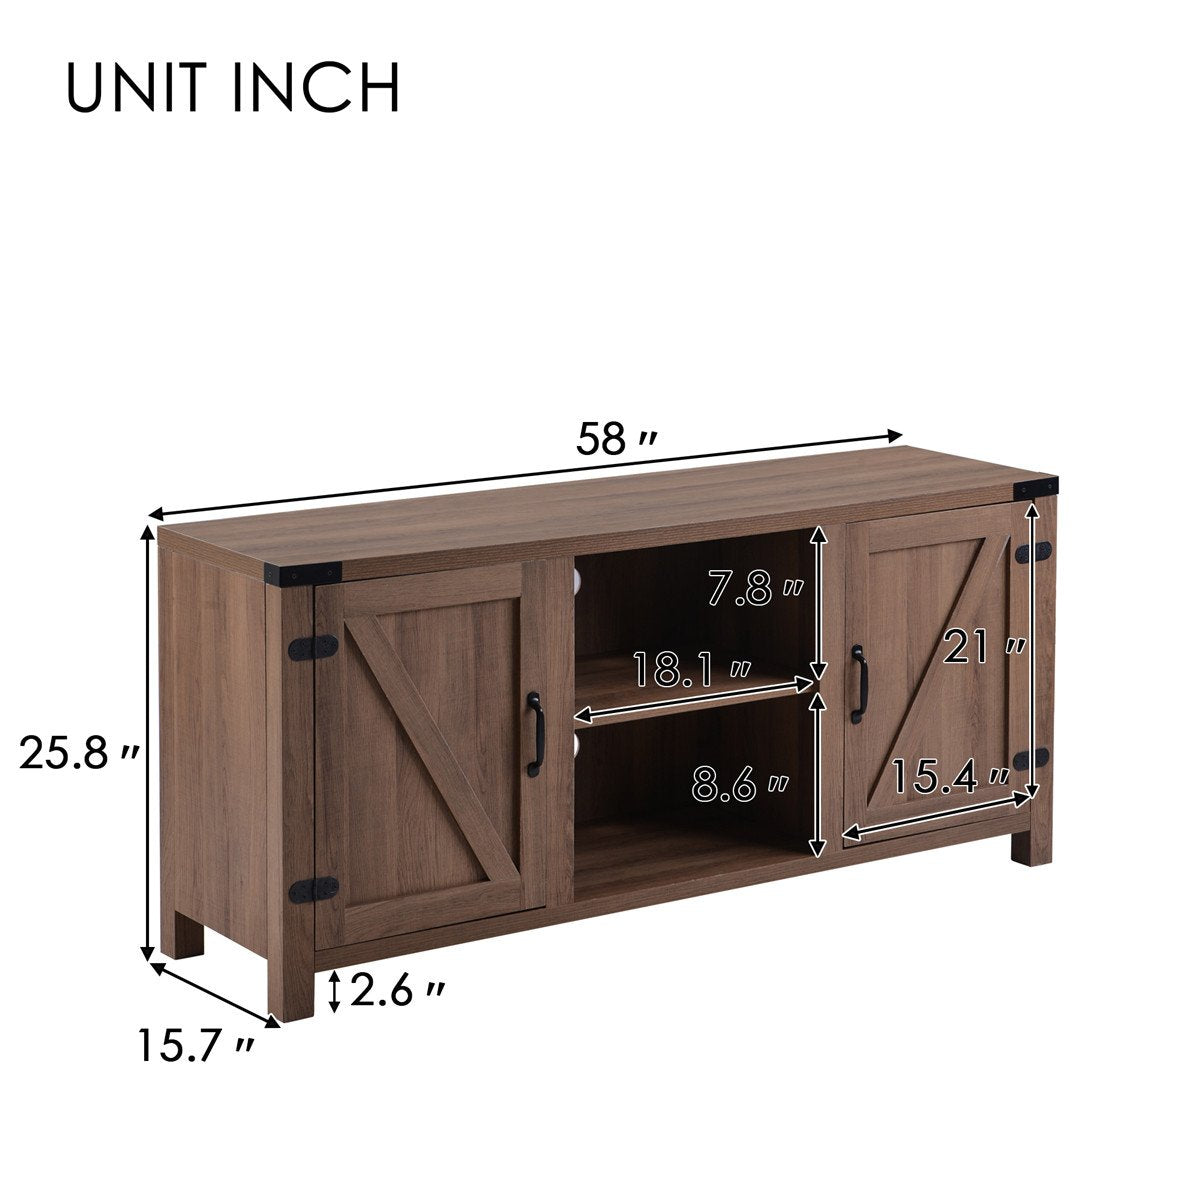 Farmhouse 58” TV Stand Media Console with Adjustable Shelves | Cabinet Doors and Cable Management